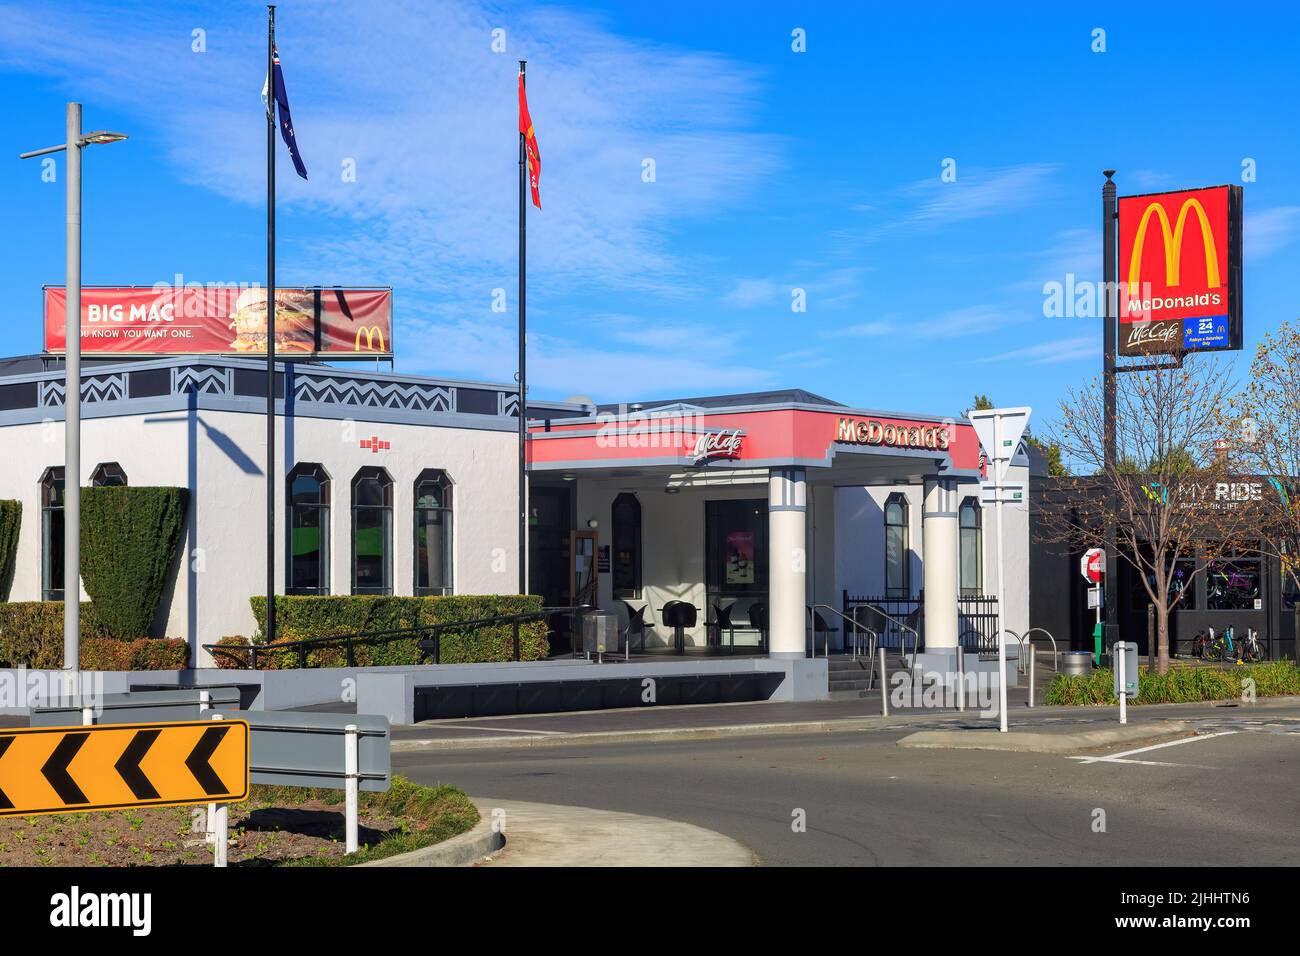 A McDonald's restaurant in Taradale, a suburb of Napier, New Zealand. It is in a retro Art Deco style to match Napier's many historic buildings Stock Photo